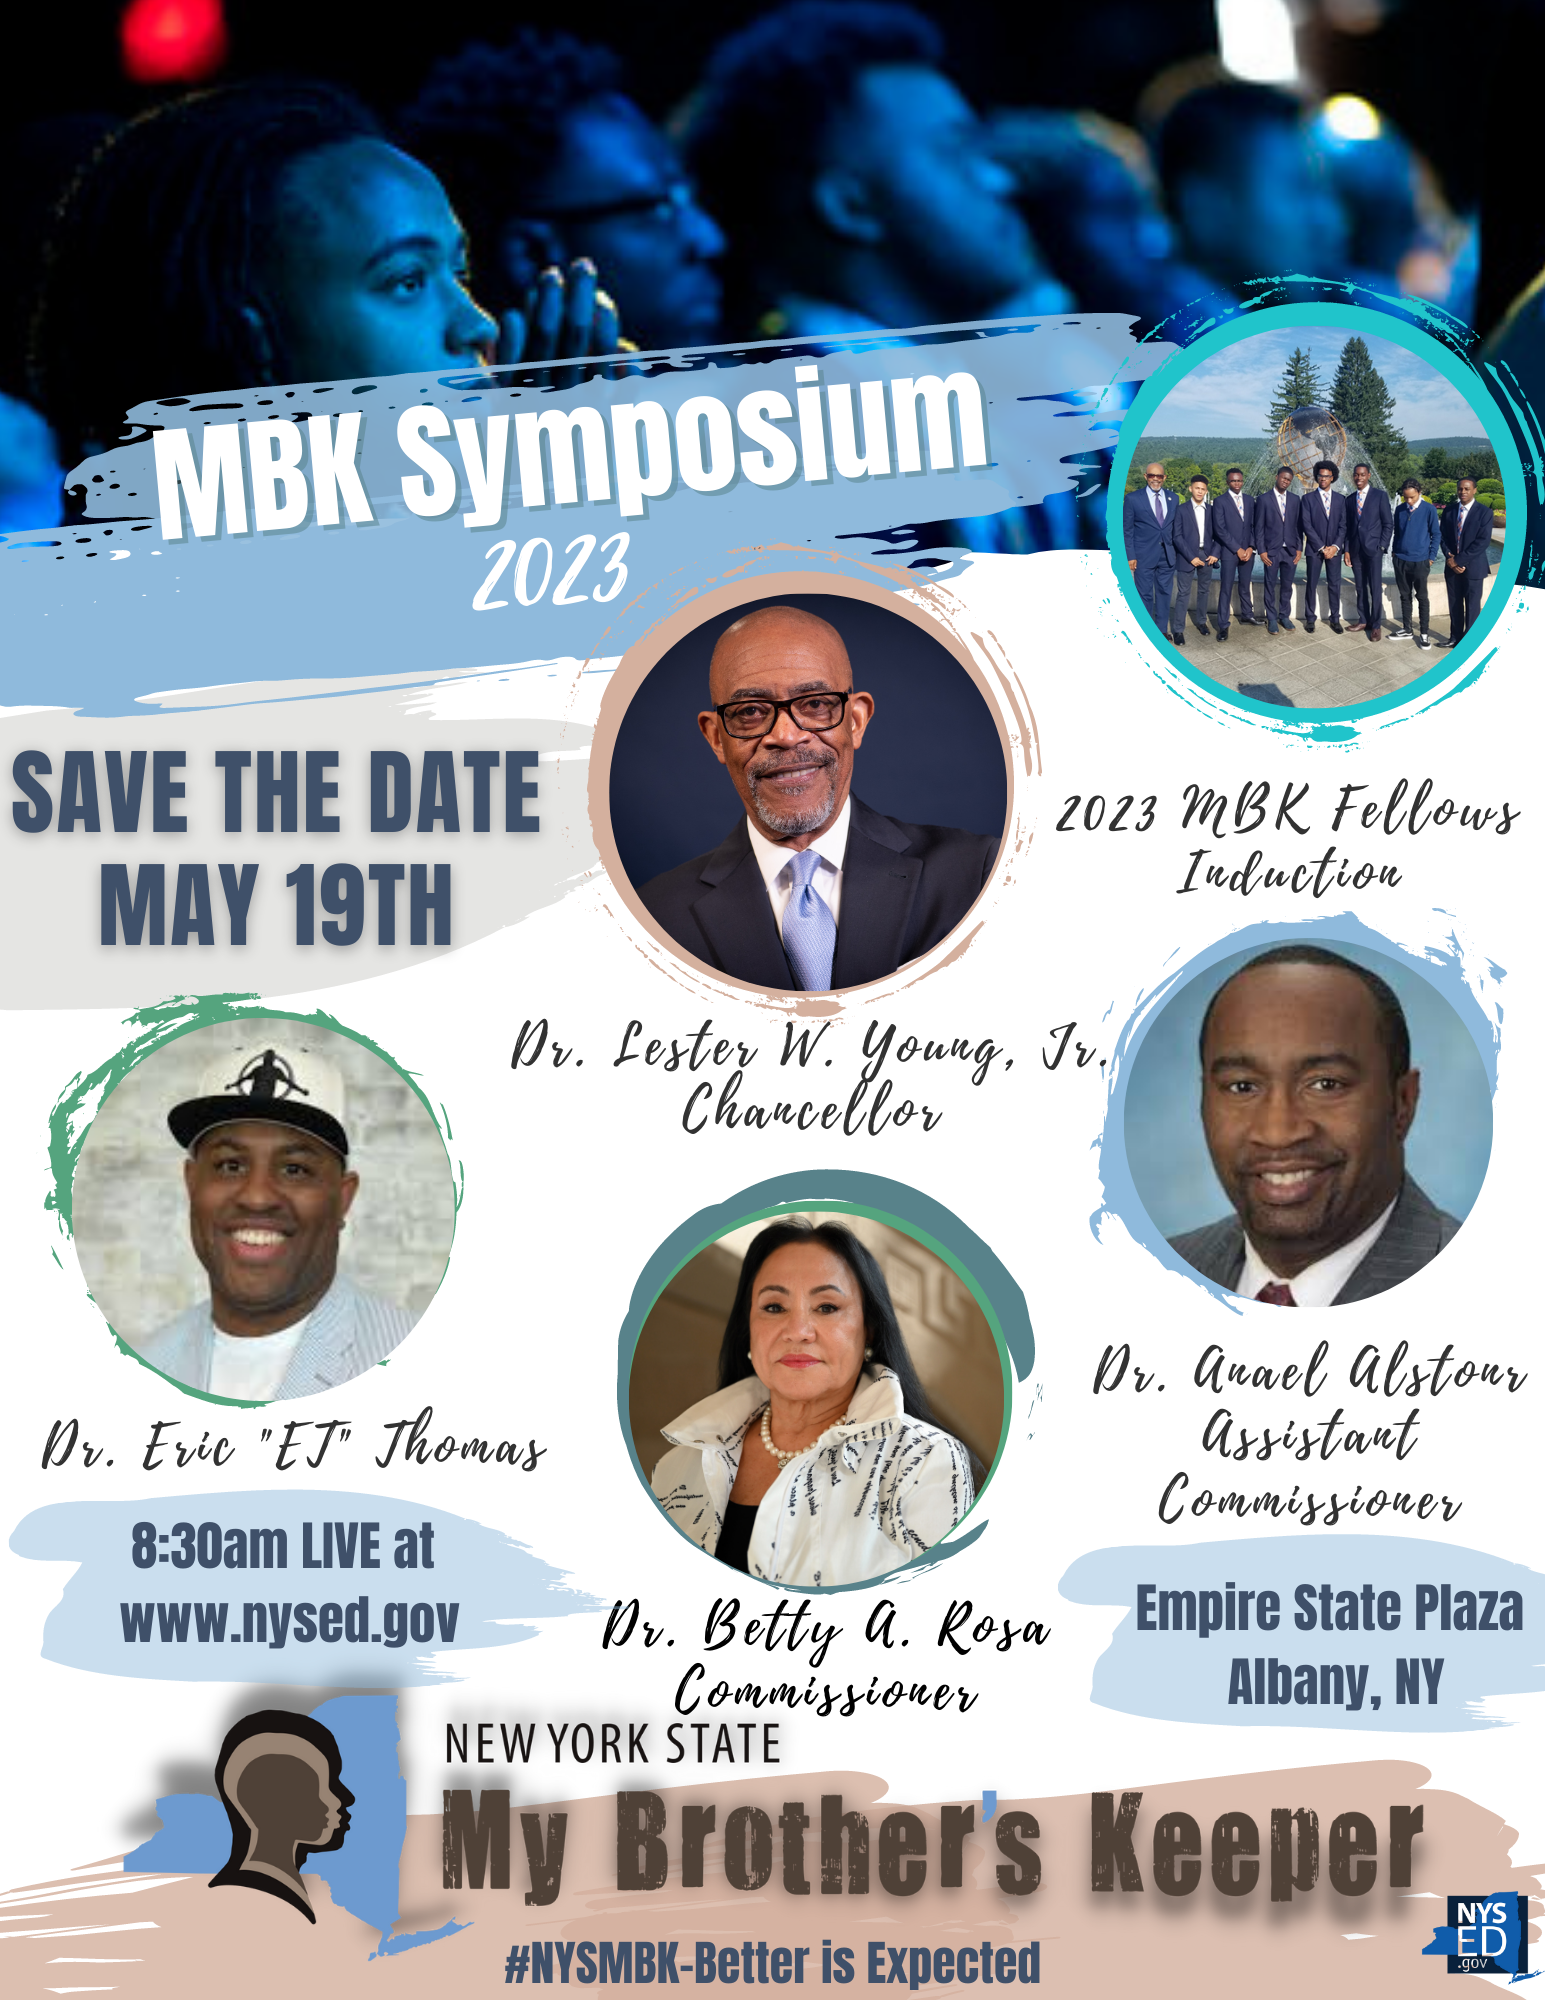 2023 MBK Symposium Save the Date - May 19, 2023